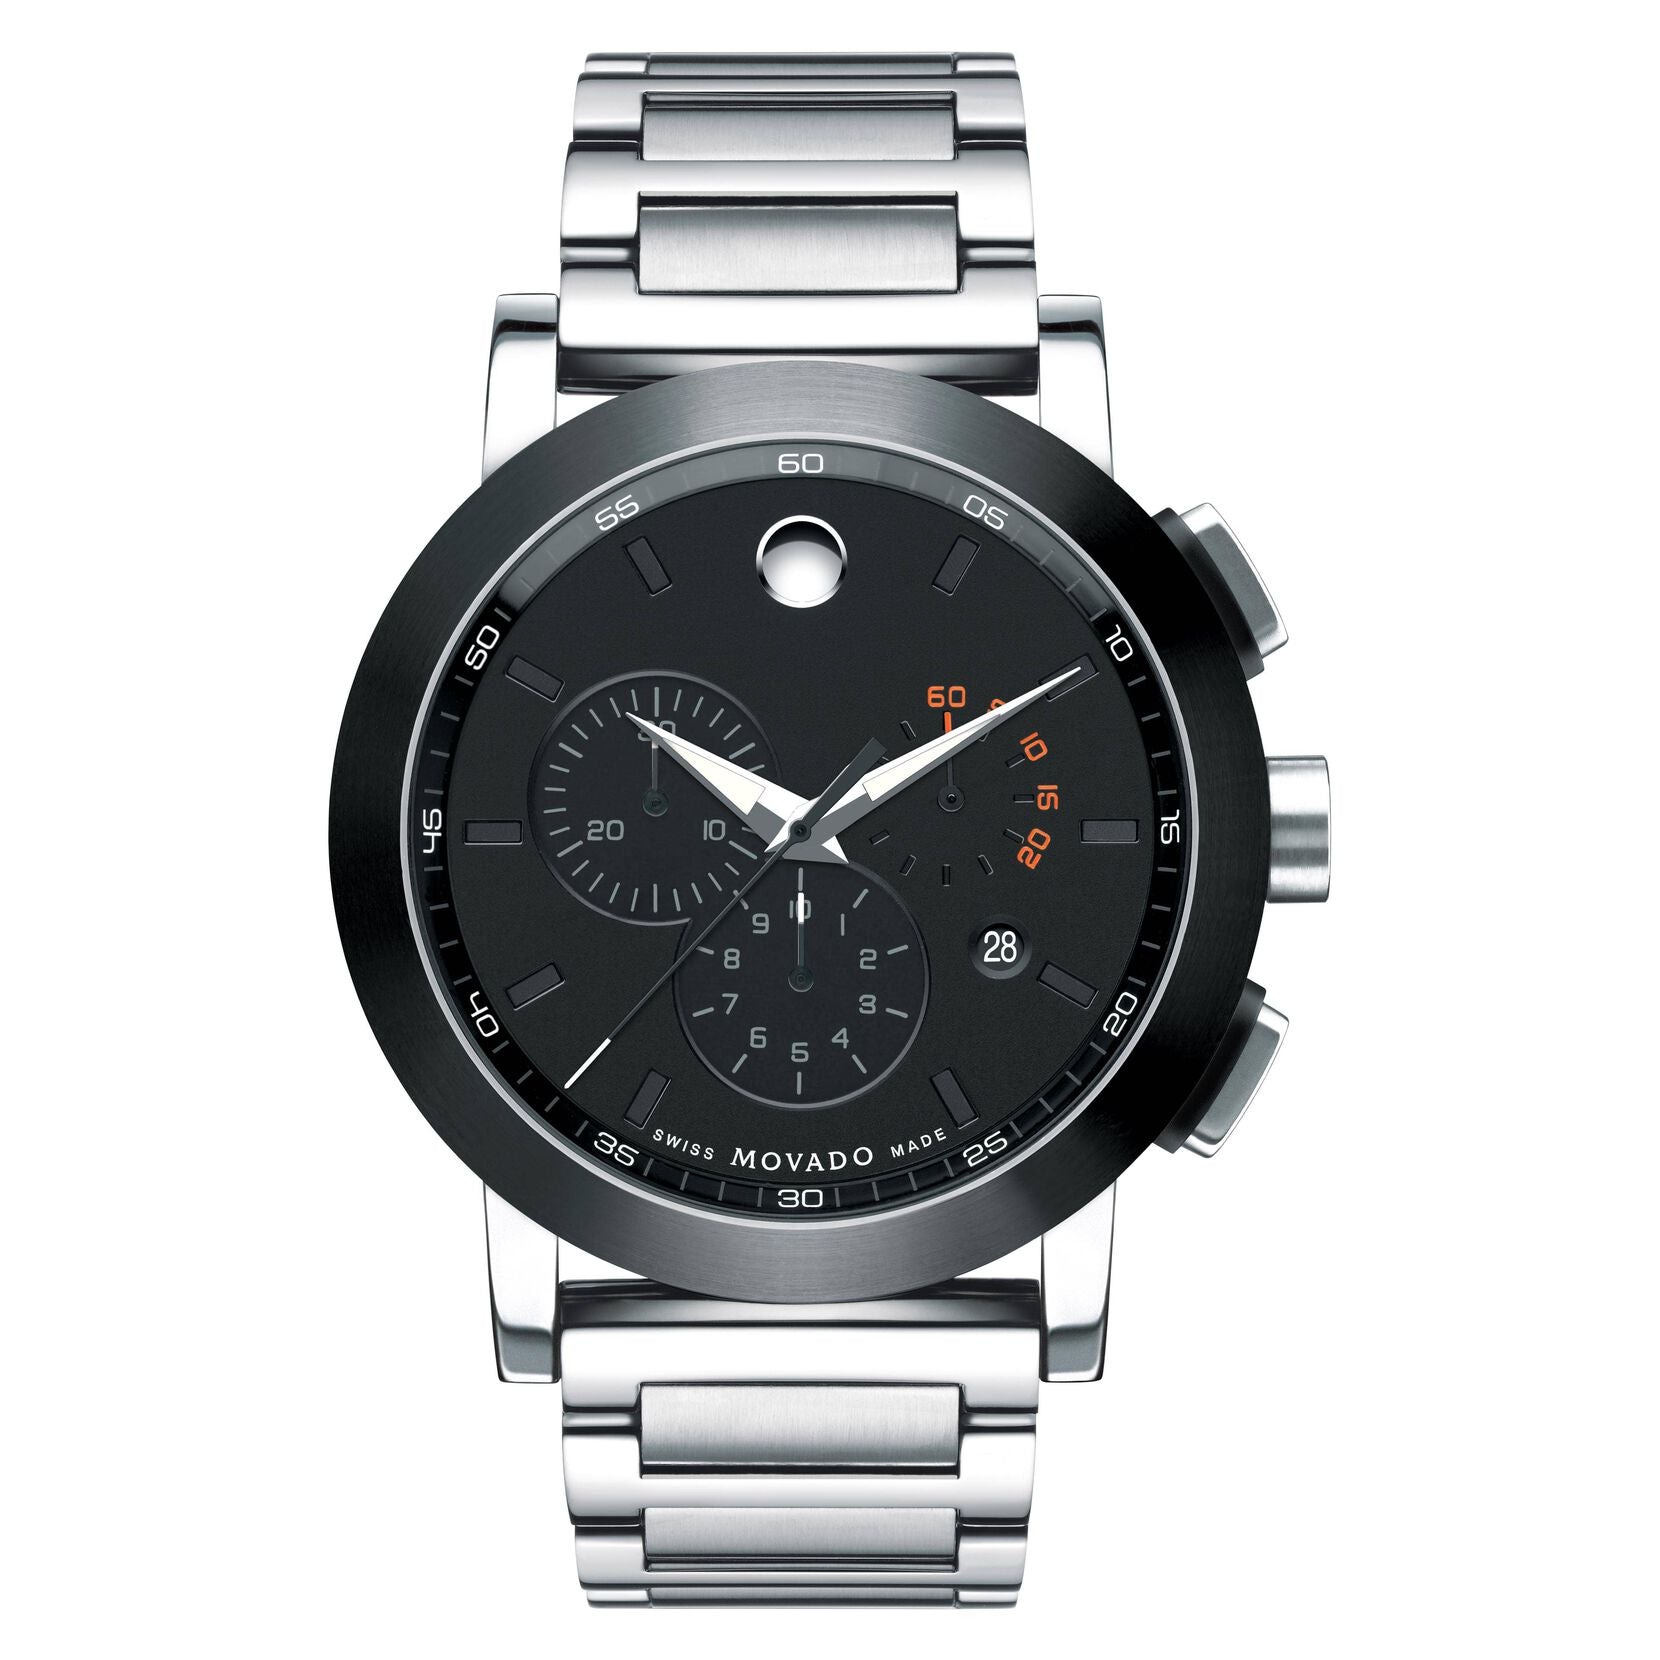 Movado Museum Chronograph Anthracite Grey Dial Men's Watch 0606792